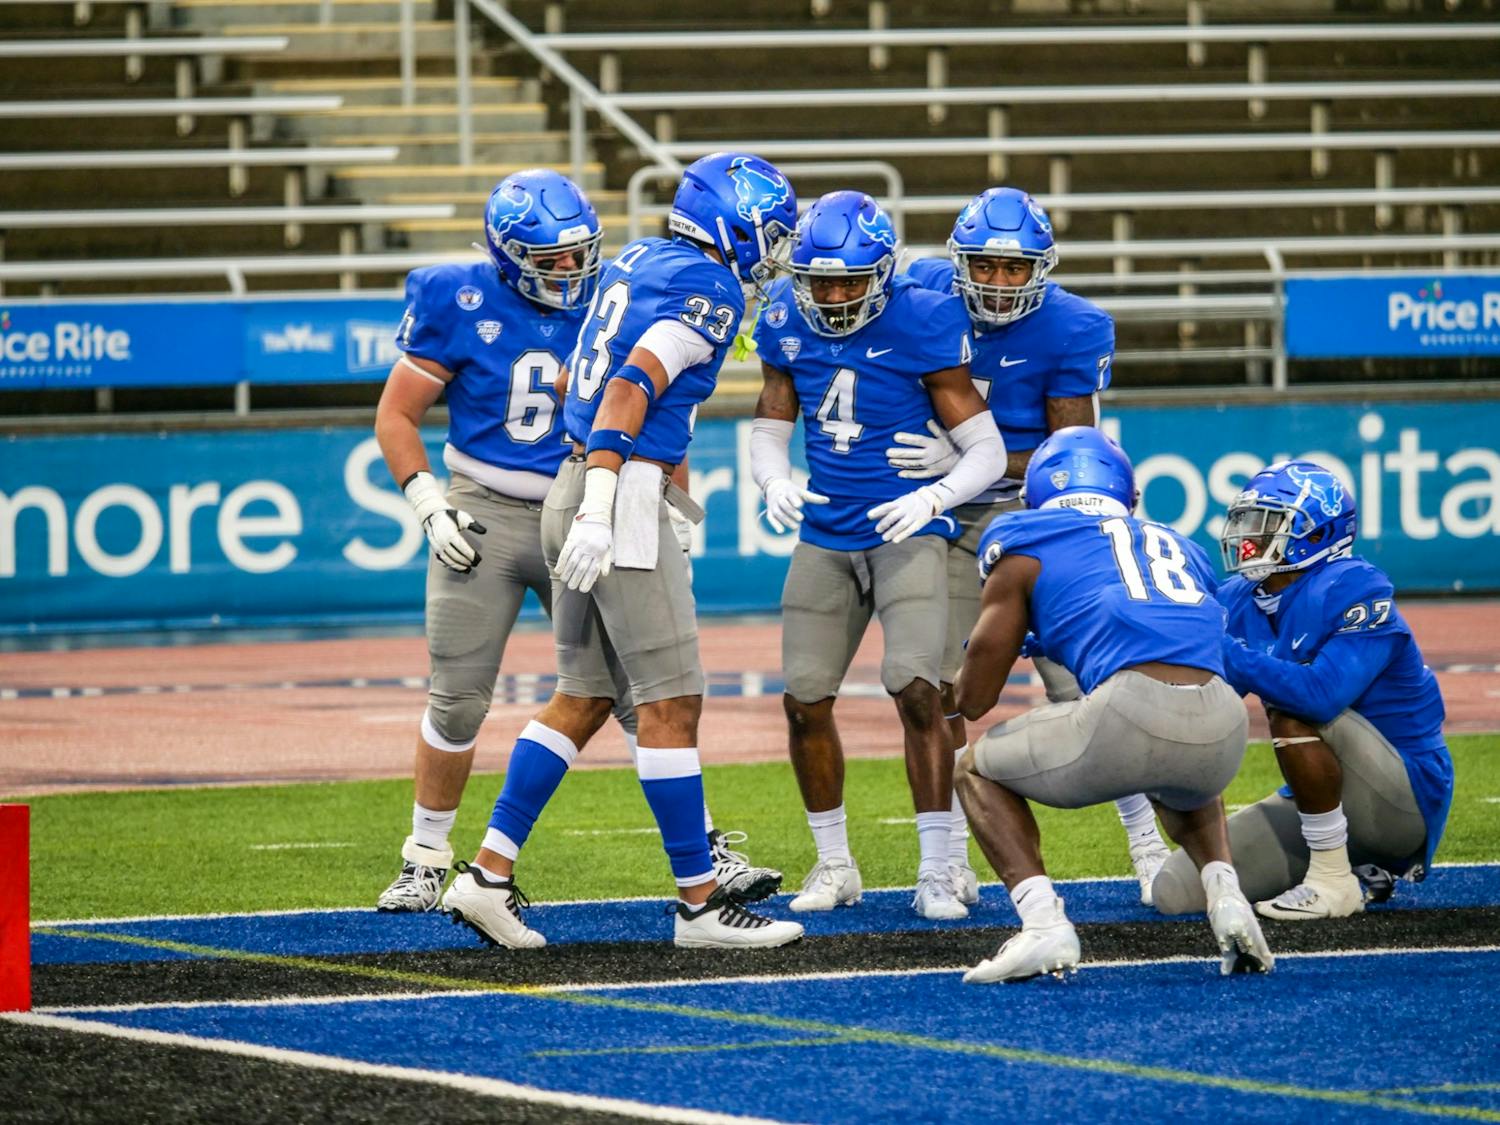 UB hopes to play a full 12-game schedule in 2021, after COVID shortened its 2020 slate.